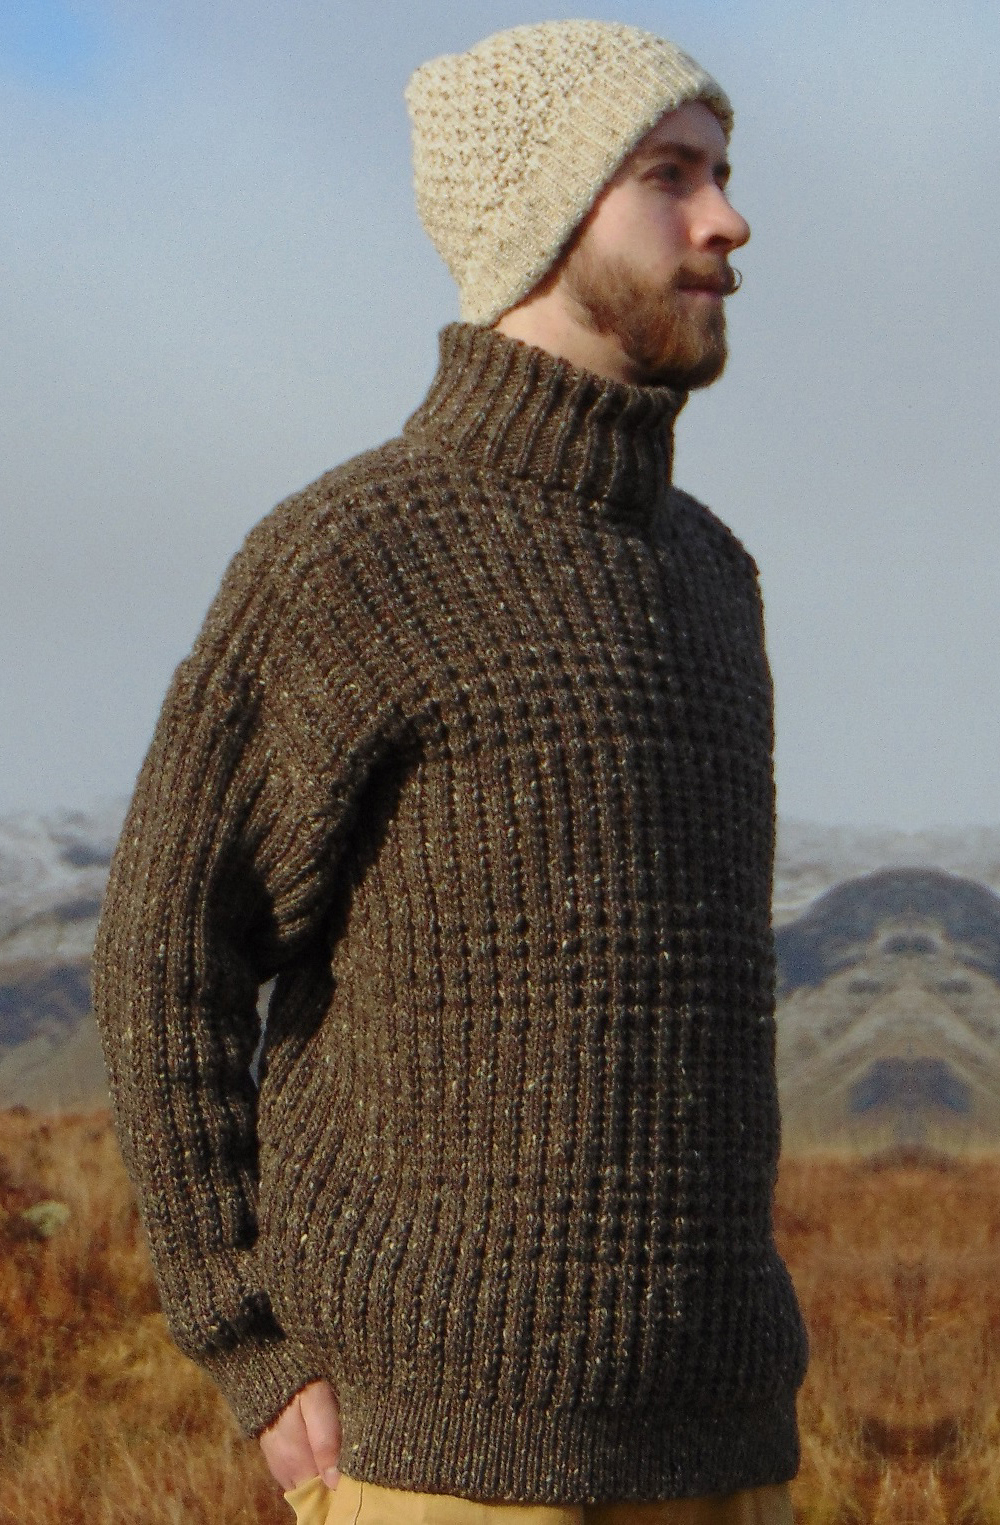 Aran Sweater Private Label Irish Mens Donegal Yarns Wool Mock Turtleneck Polo Neck Sweater Jumper Hand Loomed Hand Made